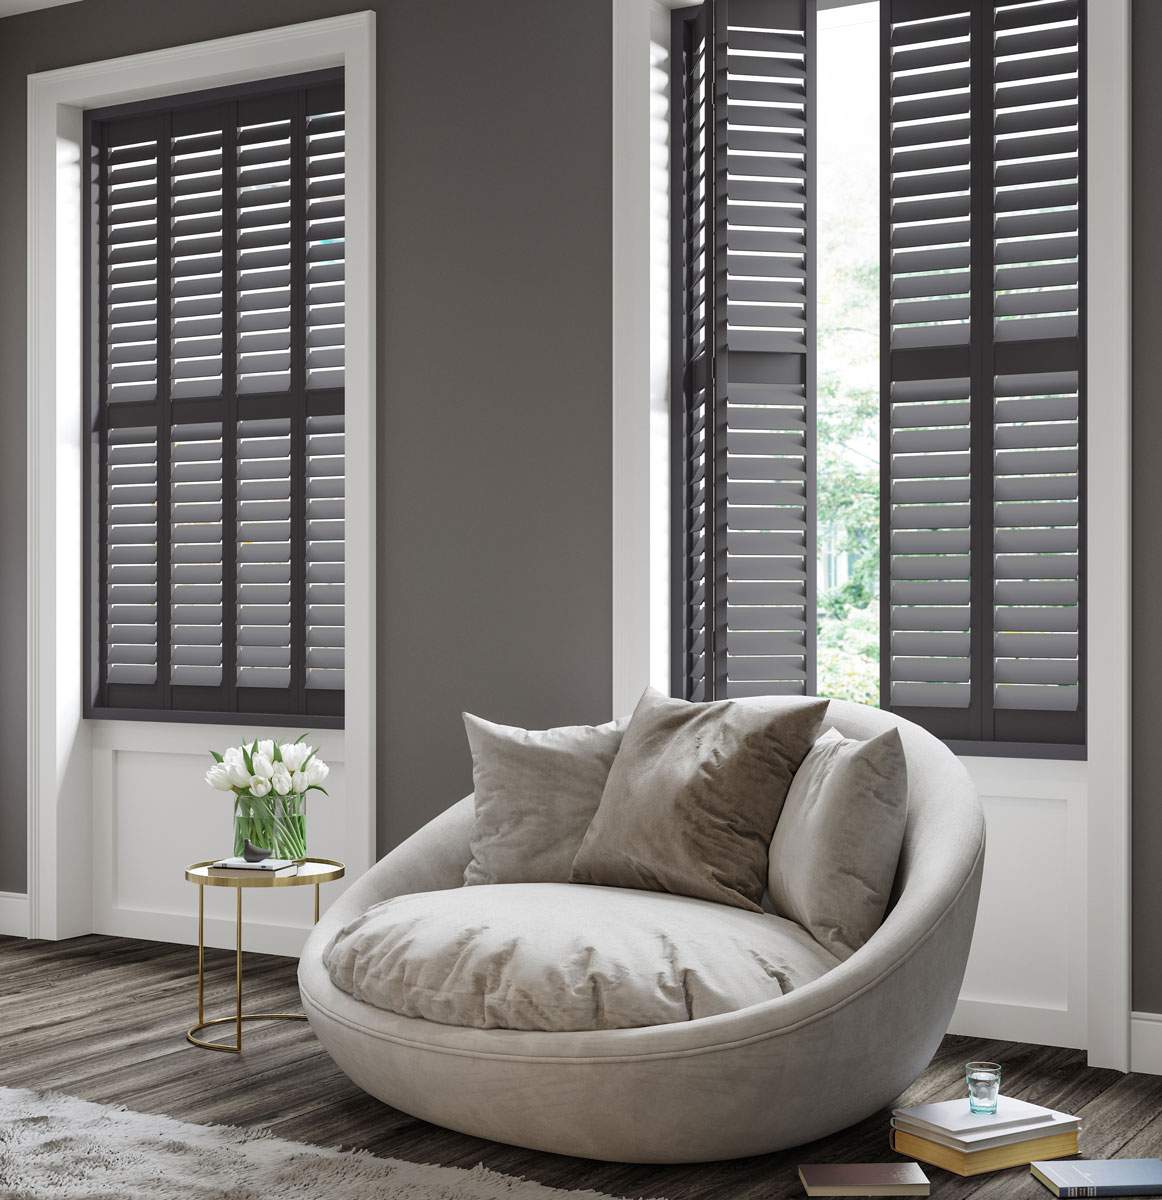 Anthracite grey shutters